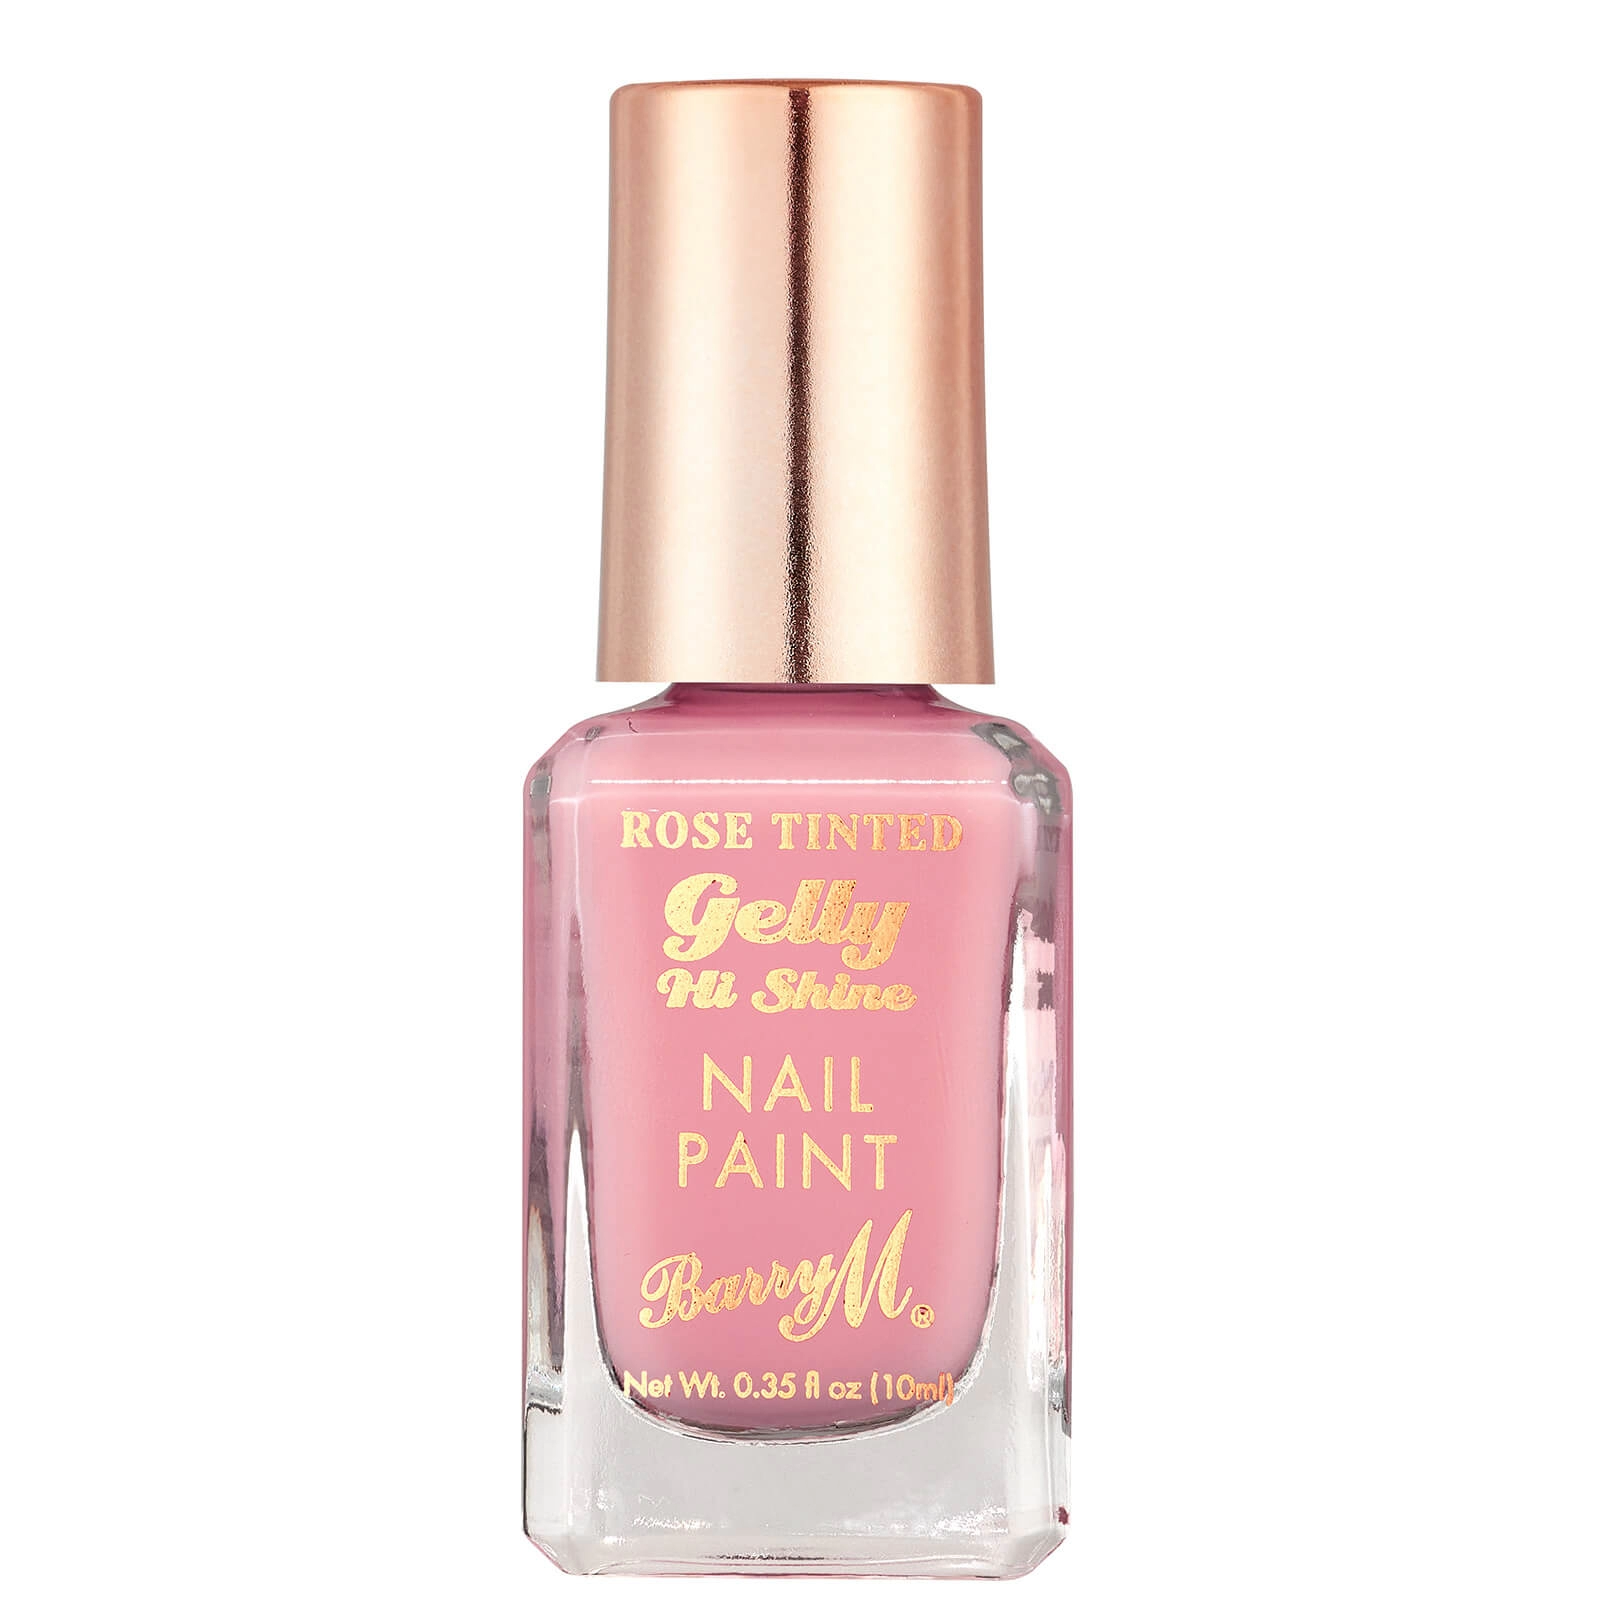 Barry M Rose Tinted Gelly Nail Paint - Eden Rose Lightest Pink 1